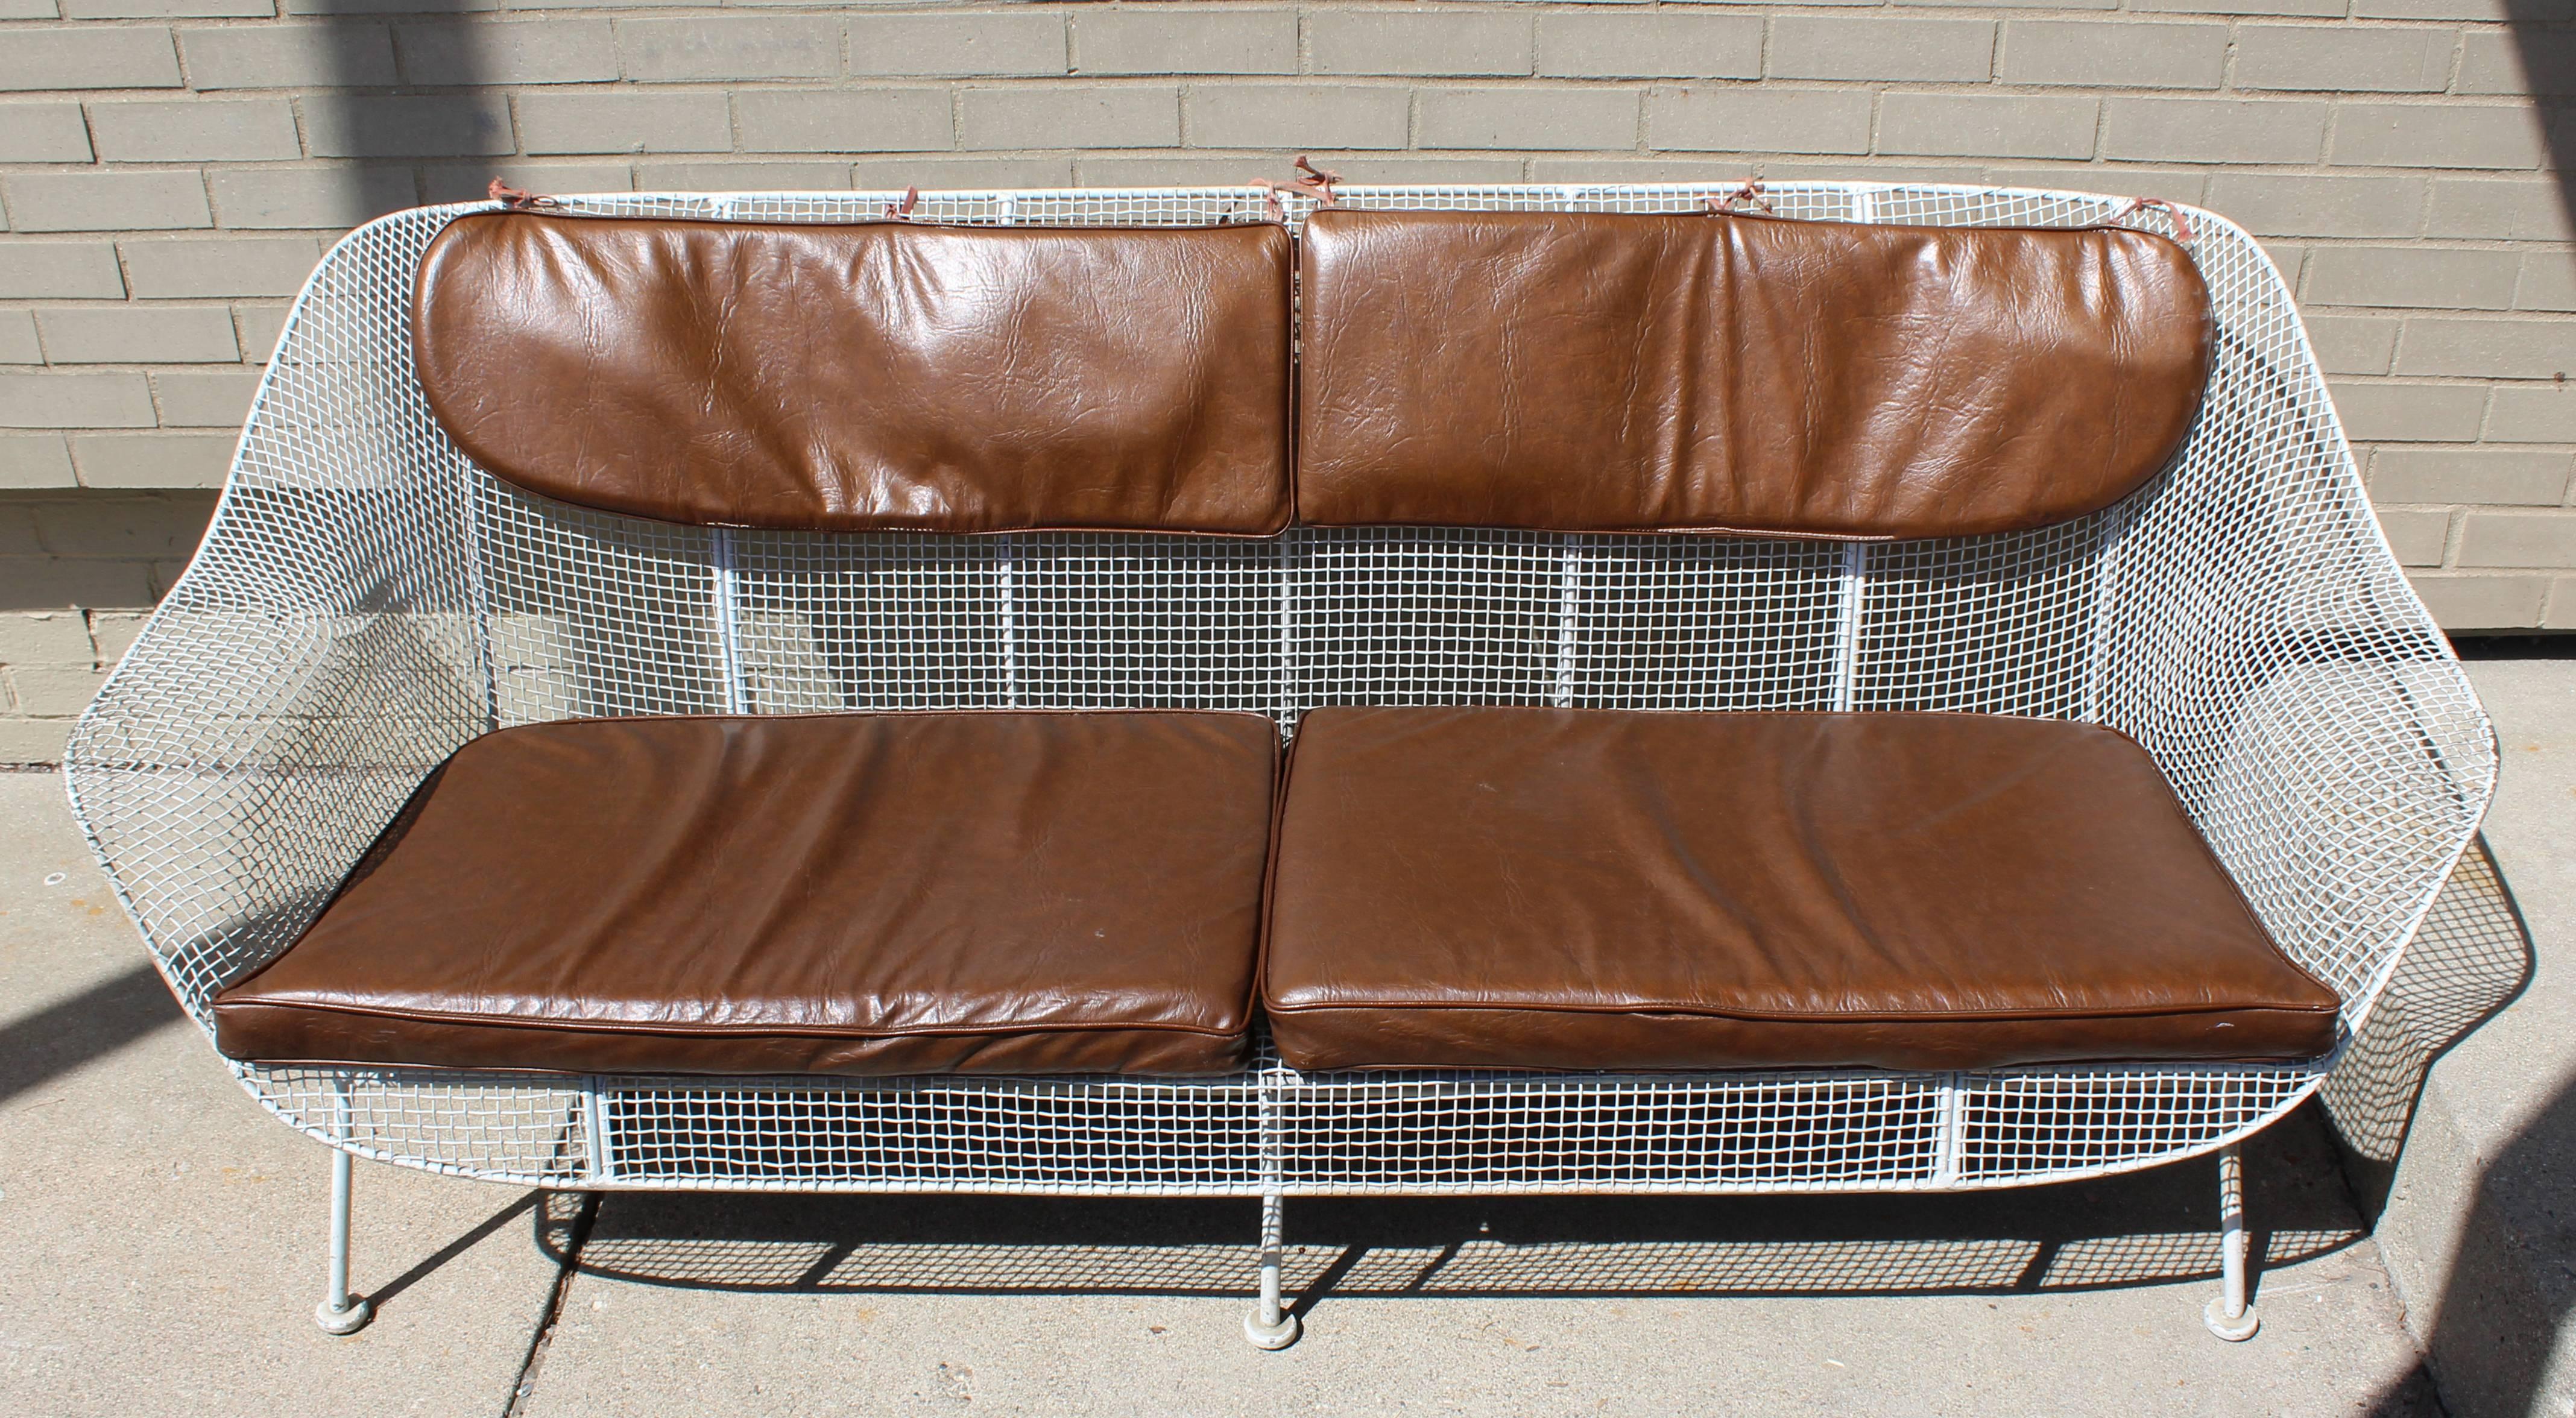 For your consideration is an incredible wrought iron, patio sofa, with rare pads made of brown vinyl, by Woodard, circa 1950s. In great condition. The dimensions are 72.75